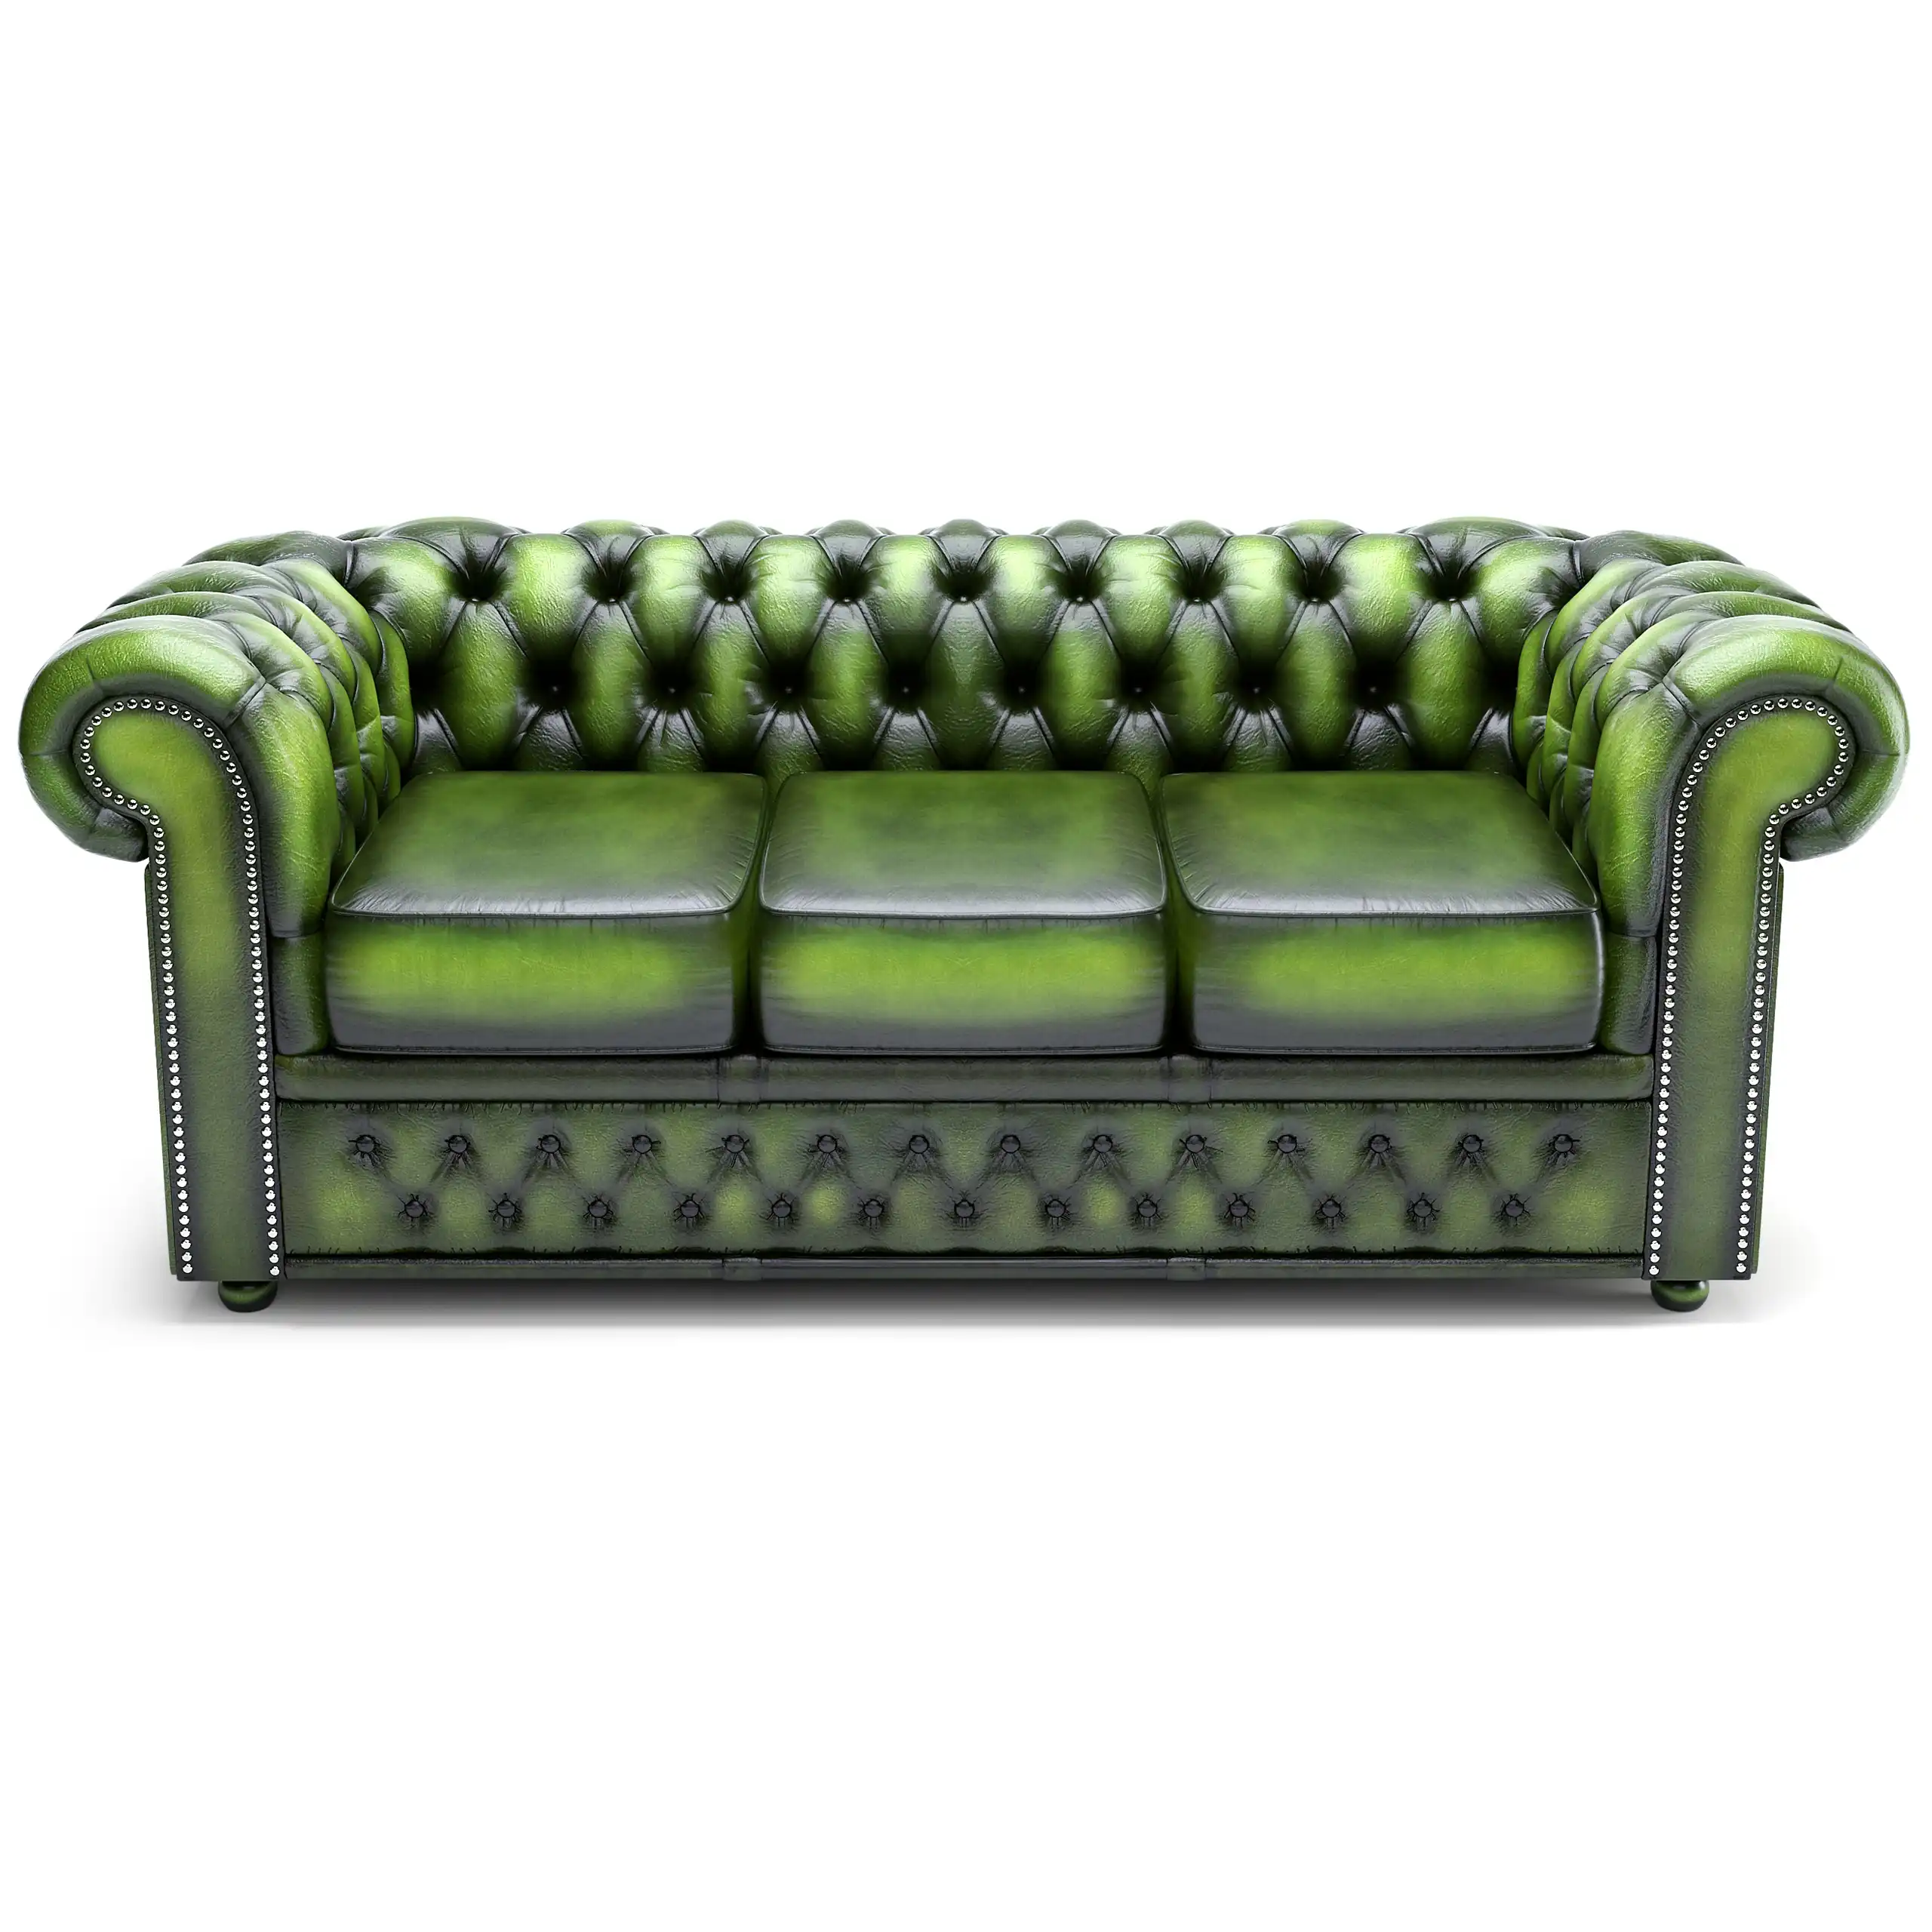 3 Seater Green Leather Chesterfield Sofa 3D Model